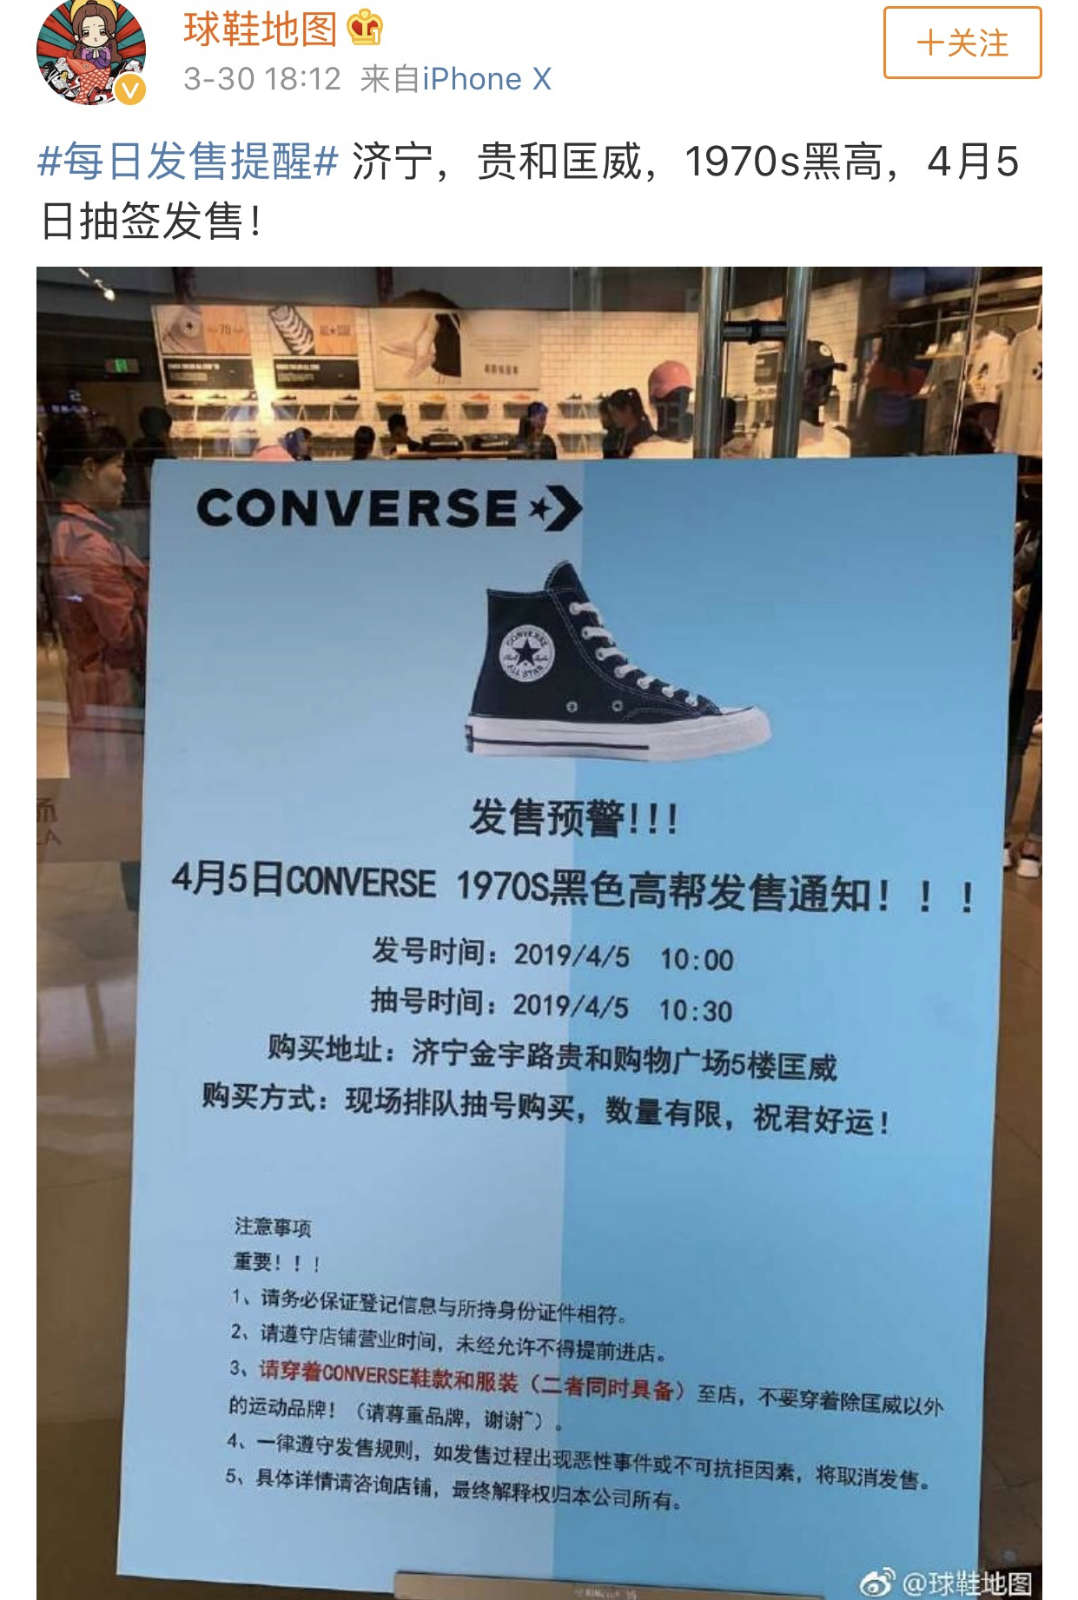 Converse slammed for compulsory dressing code to buy shoes - People's Daily  Online